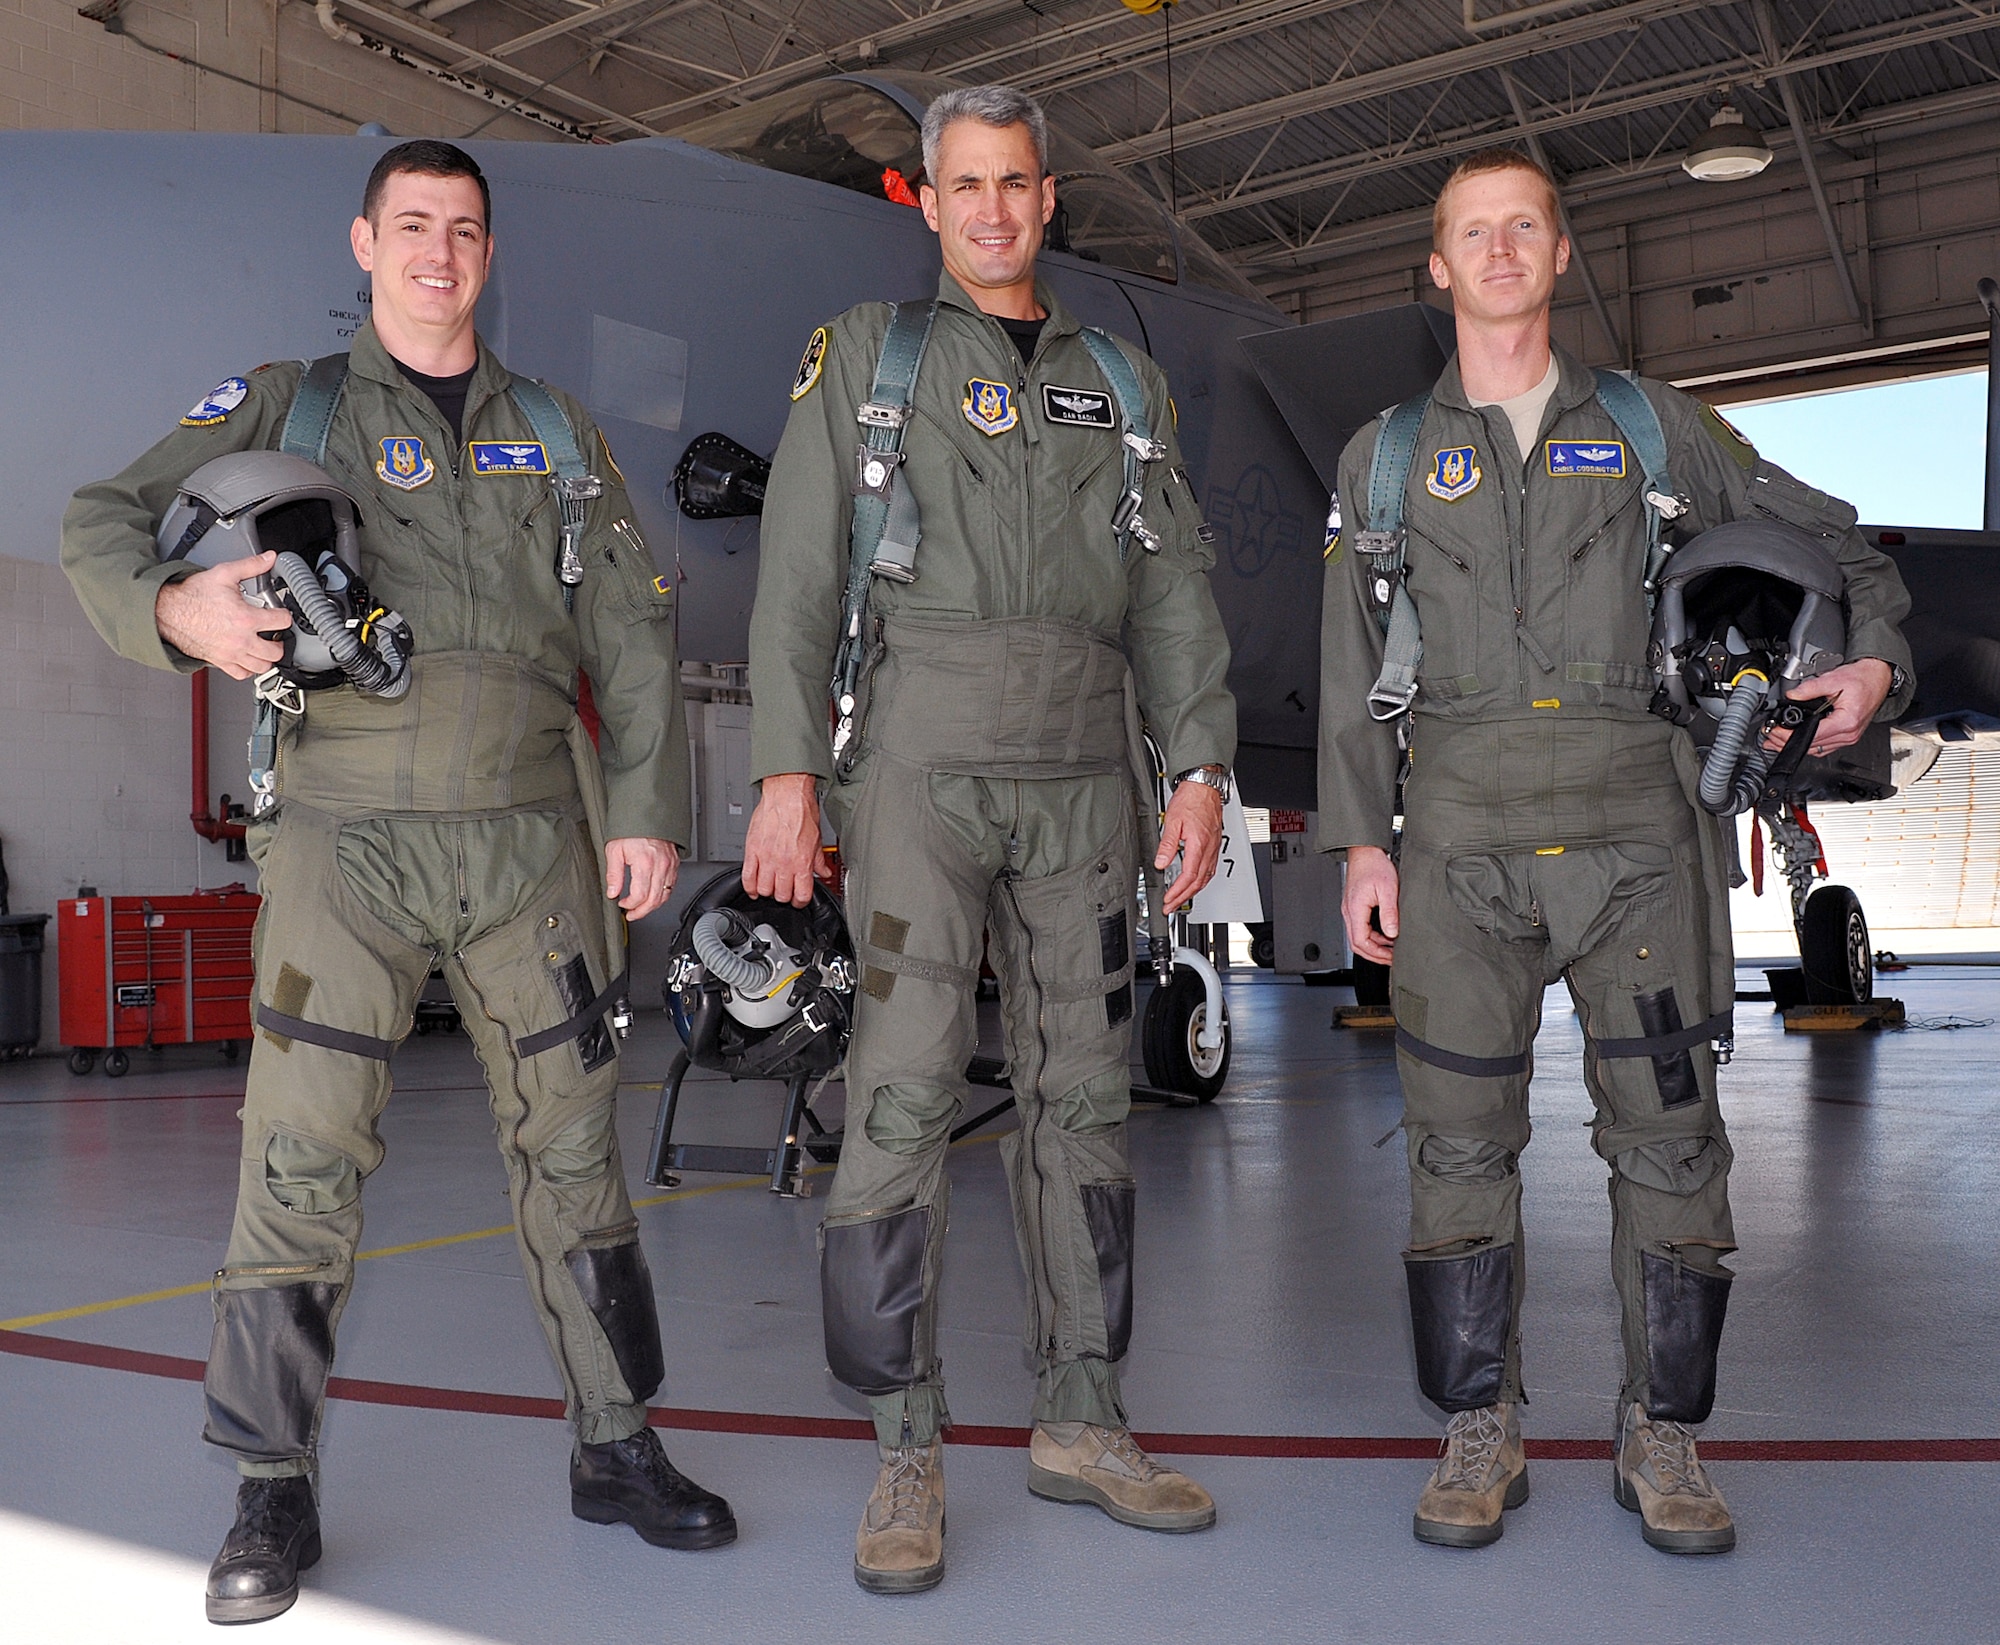 Maj. Steve "Ritalin" D'Amico, Lt. Col. Dan "Gus" Badia and Maj. Chris "Torch" Coddington are three of the test pilots who put F-15 aircraft through its paces before returning them to the warfighter. U. S. Air Force photo by Tommie Horton